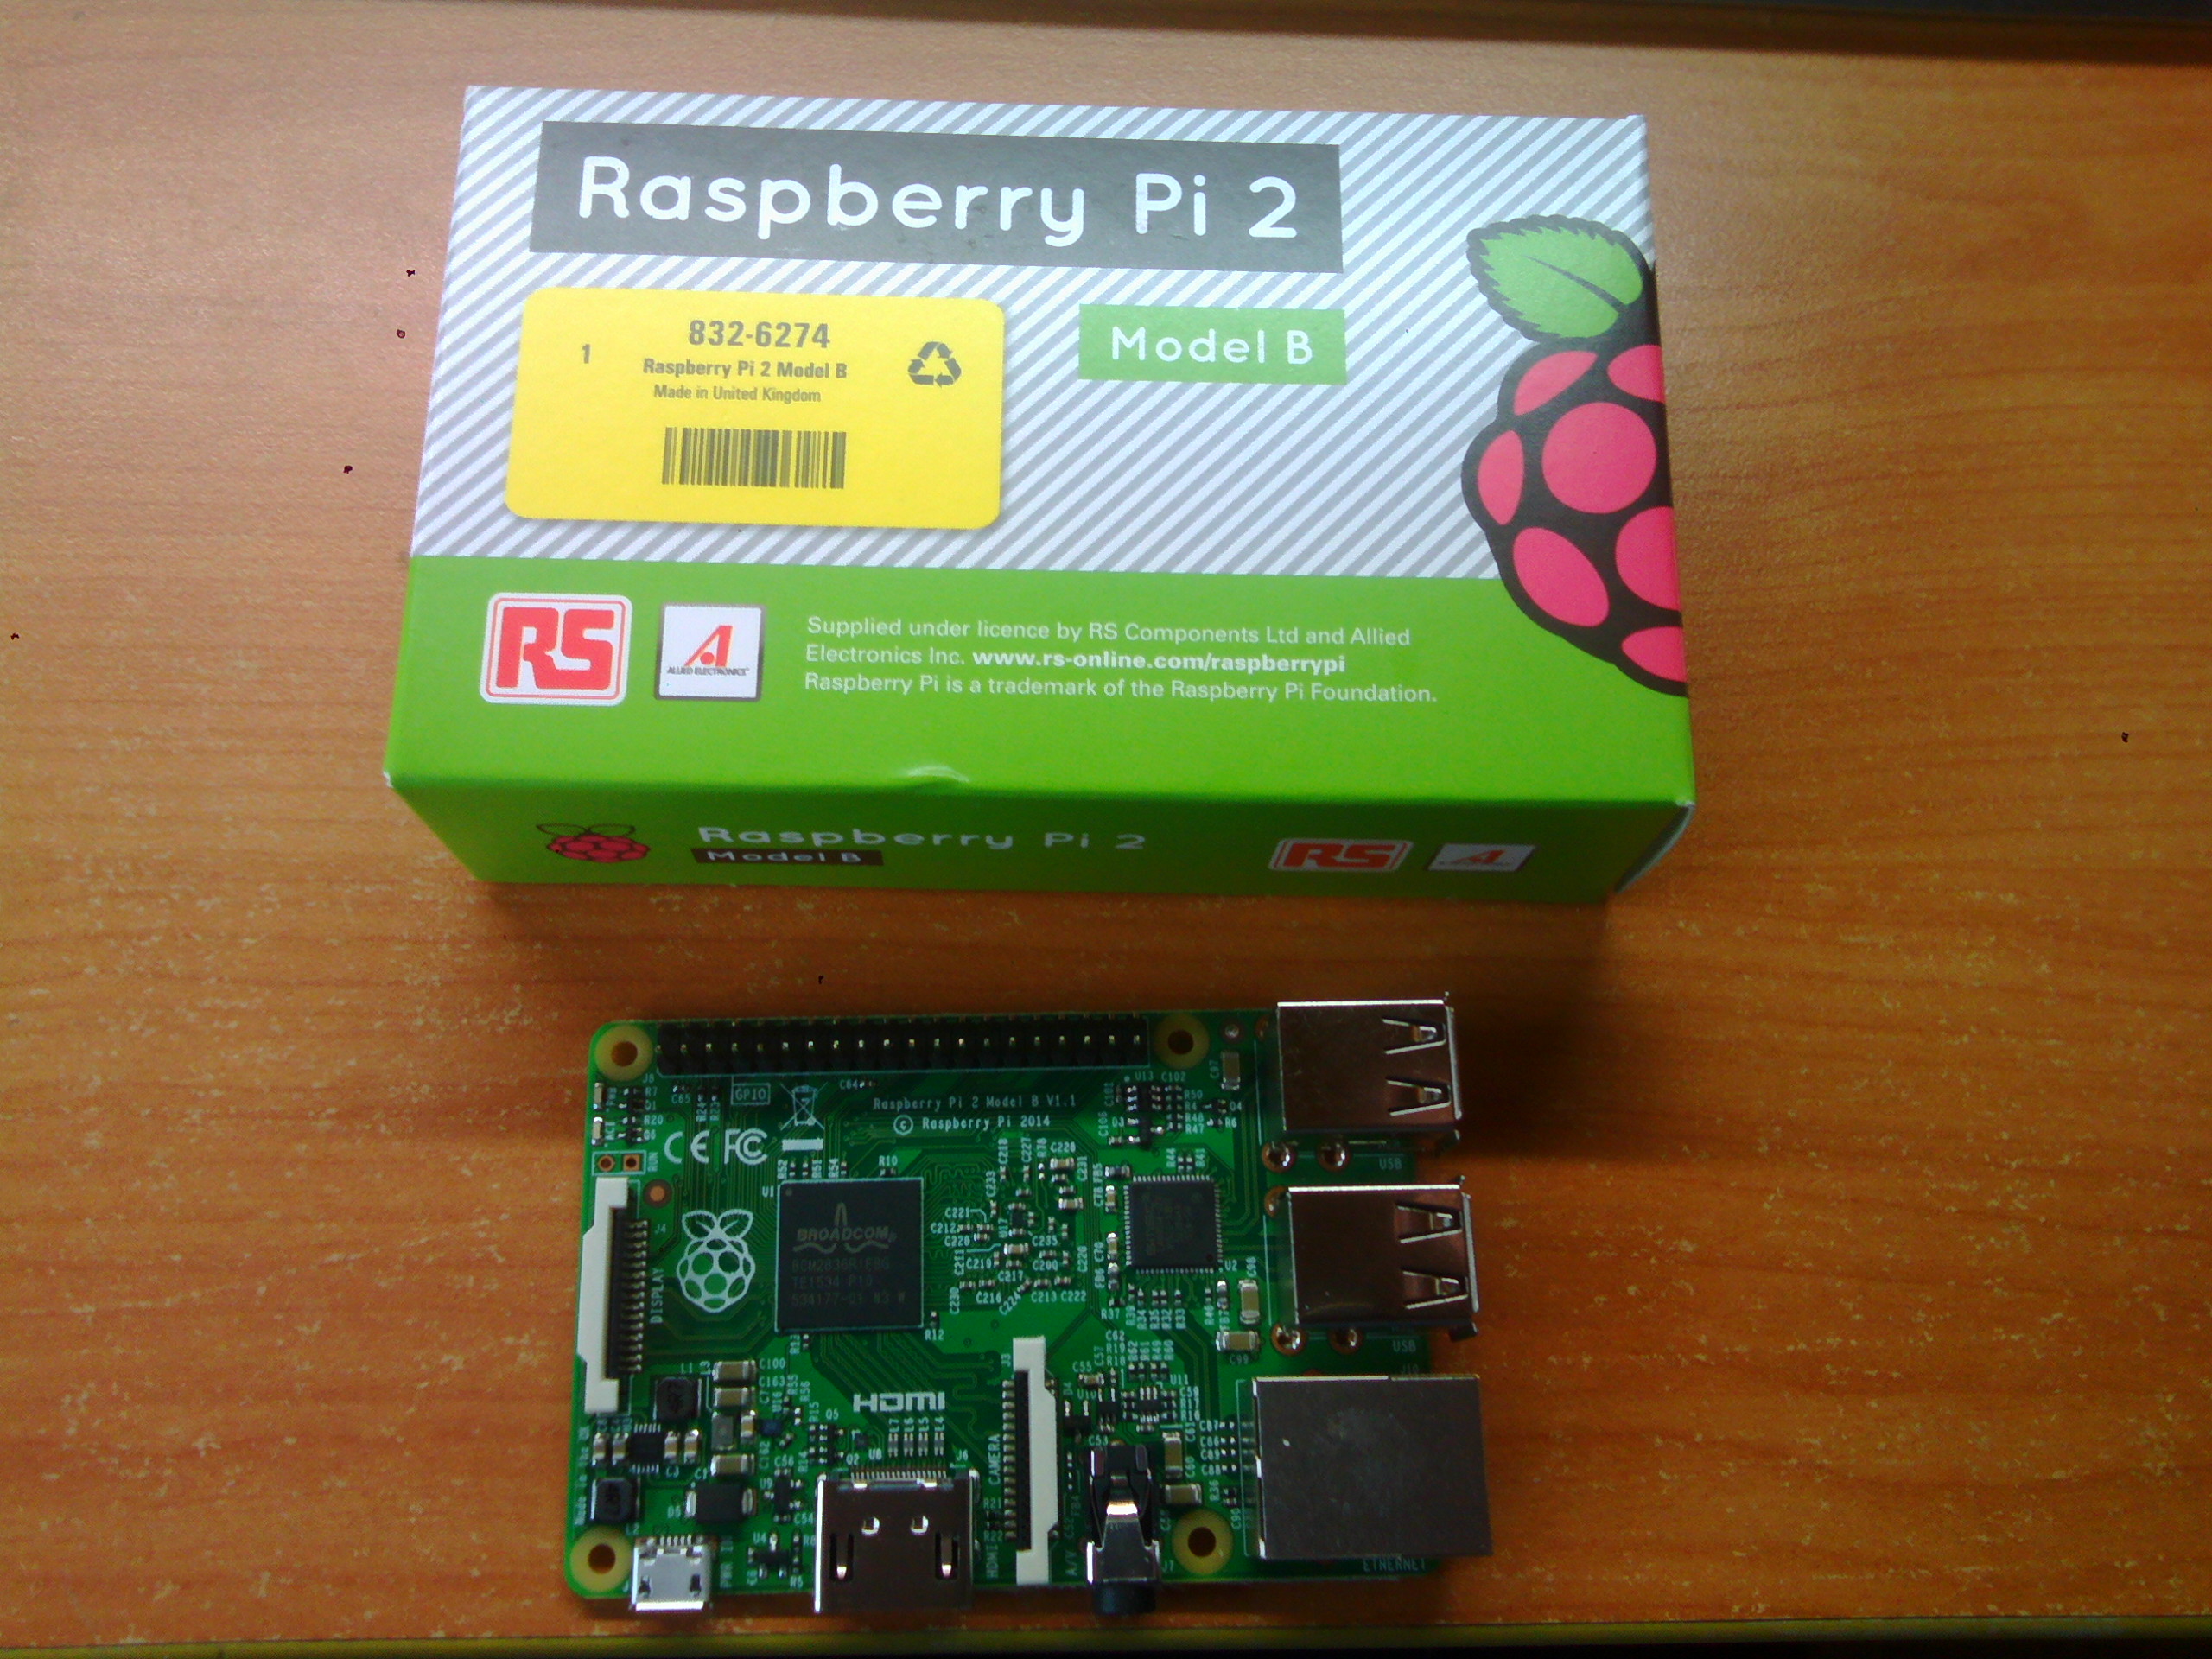 Raspberry Pi and package